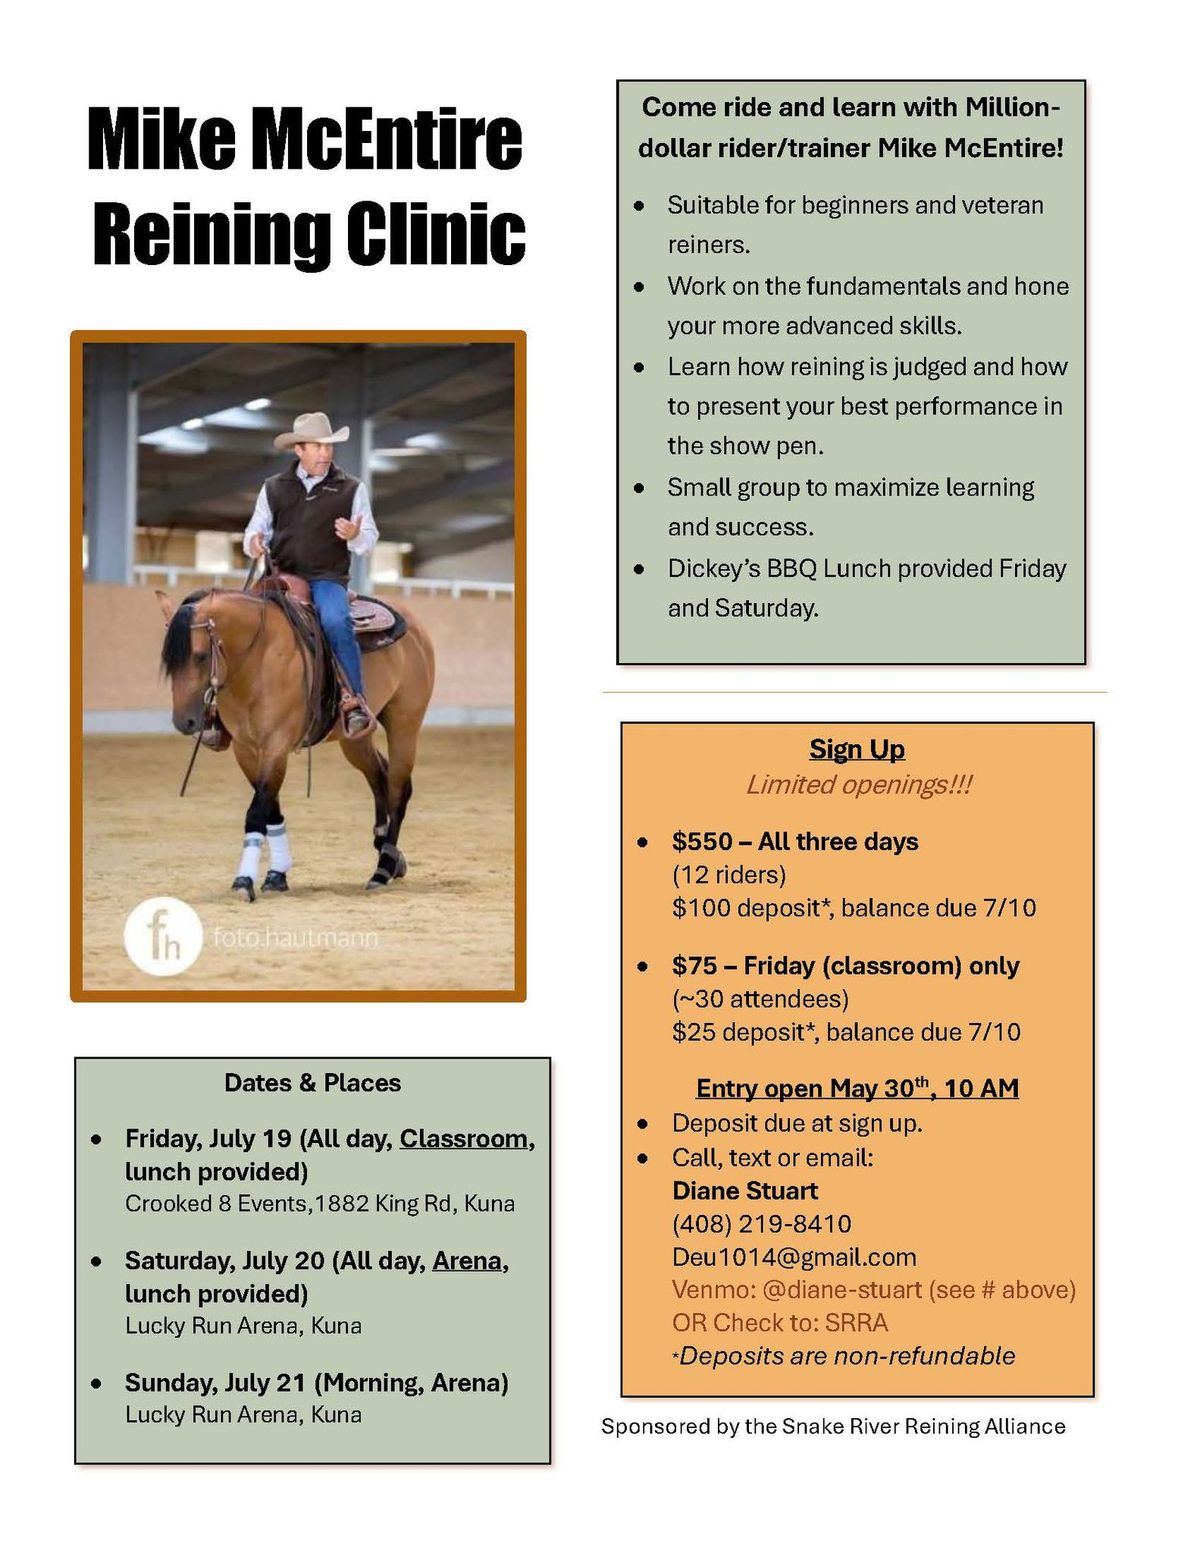 Come ride and learn with Million dollar rider\/trainer Mike McEntire!